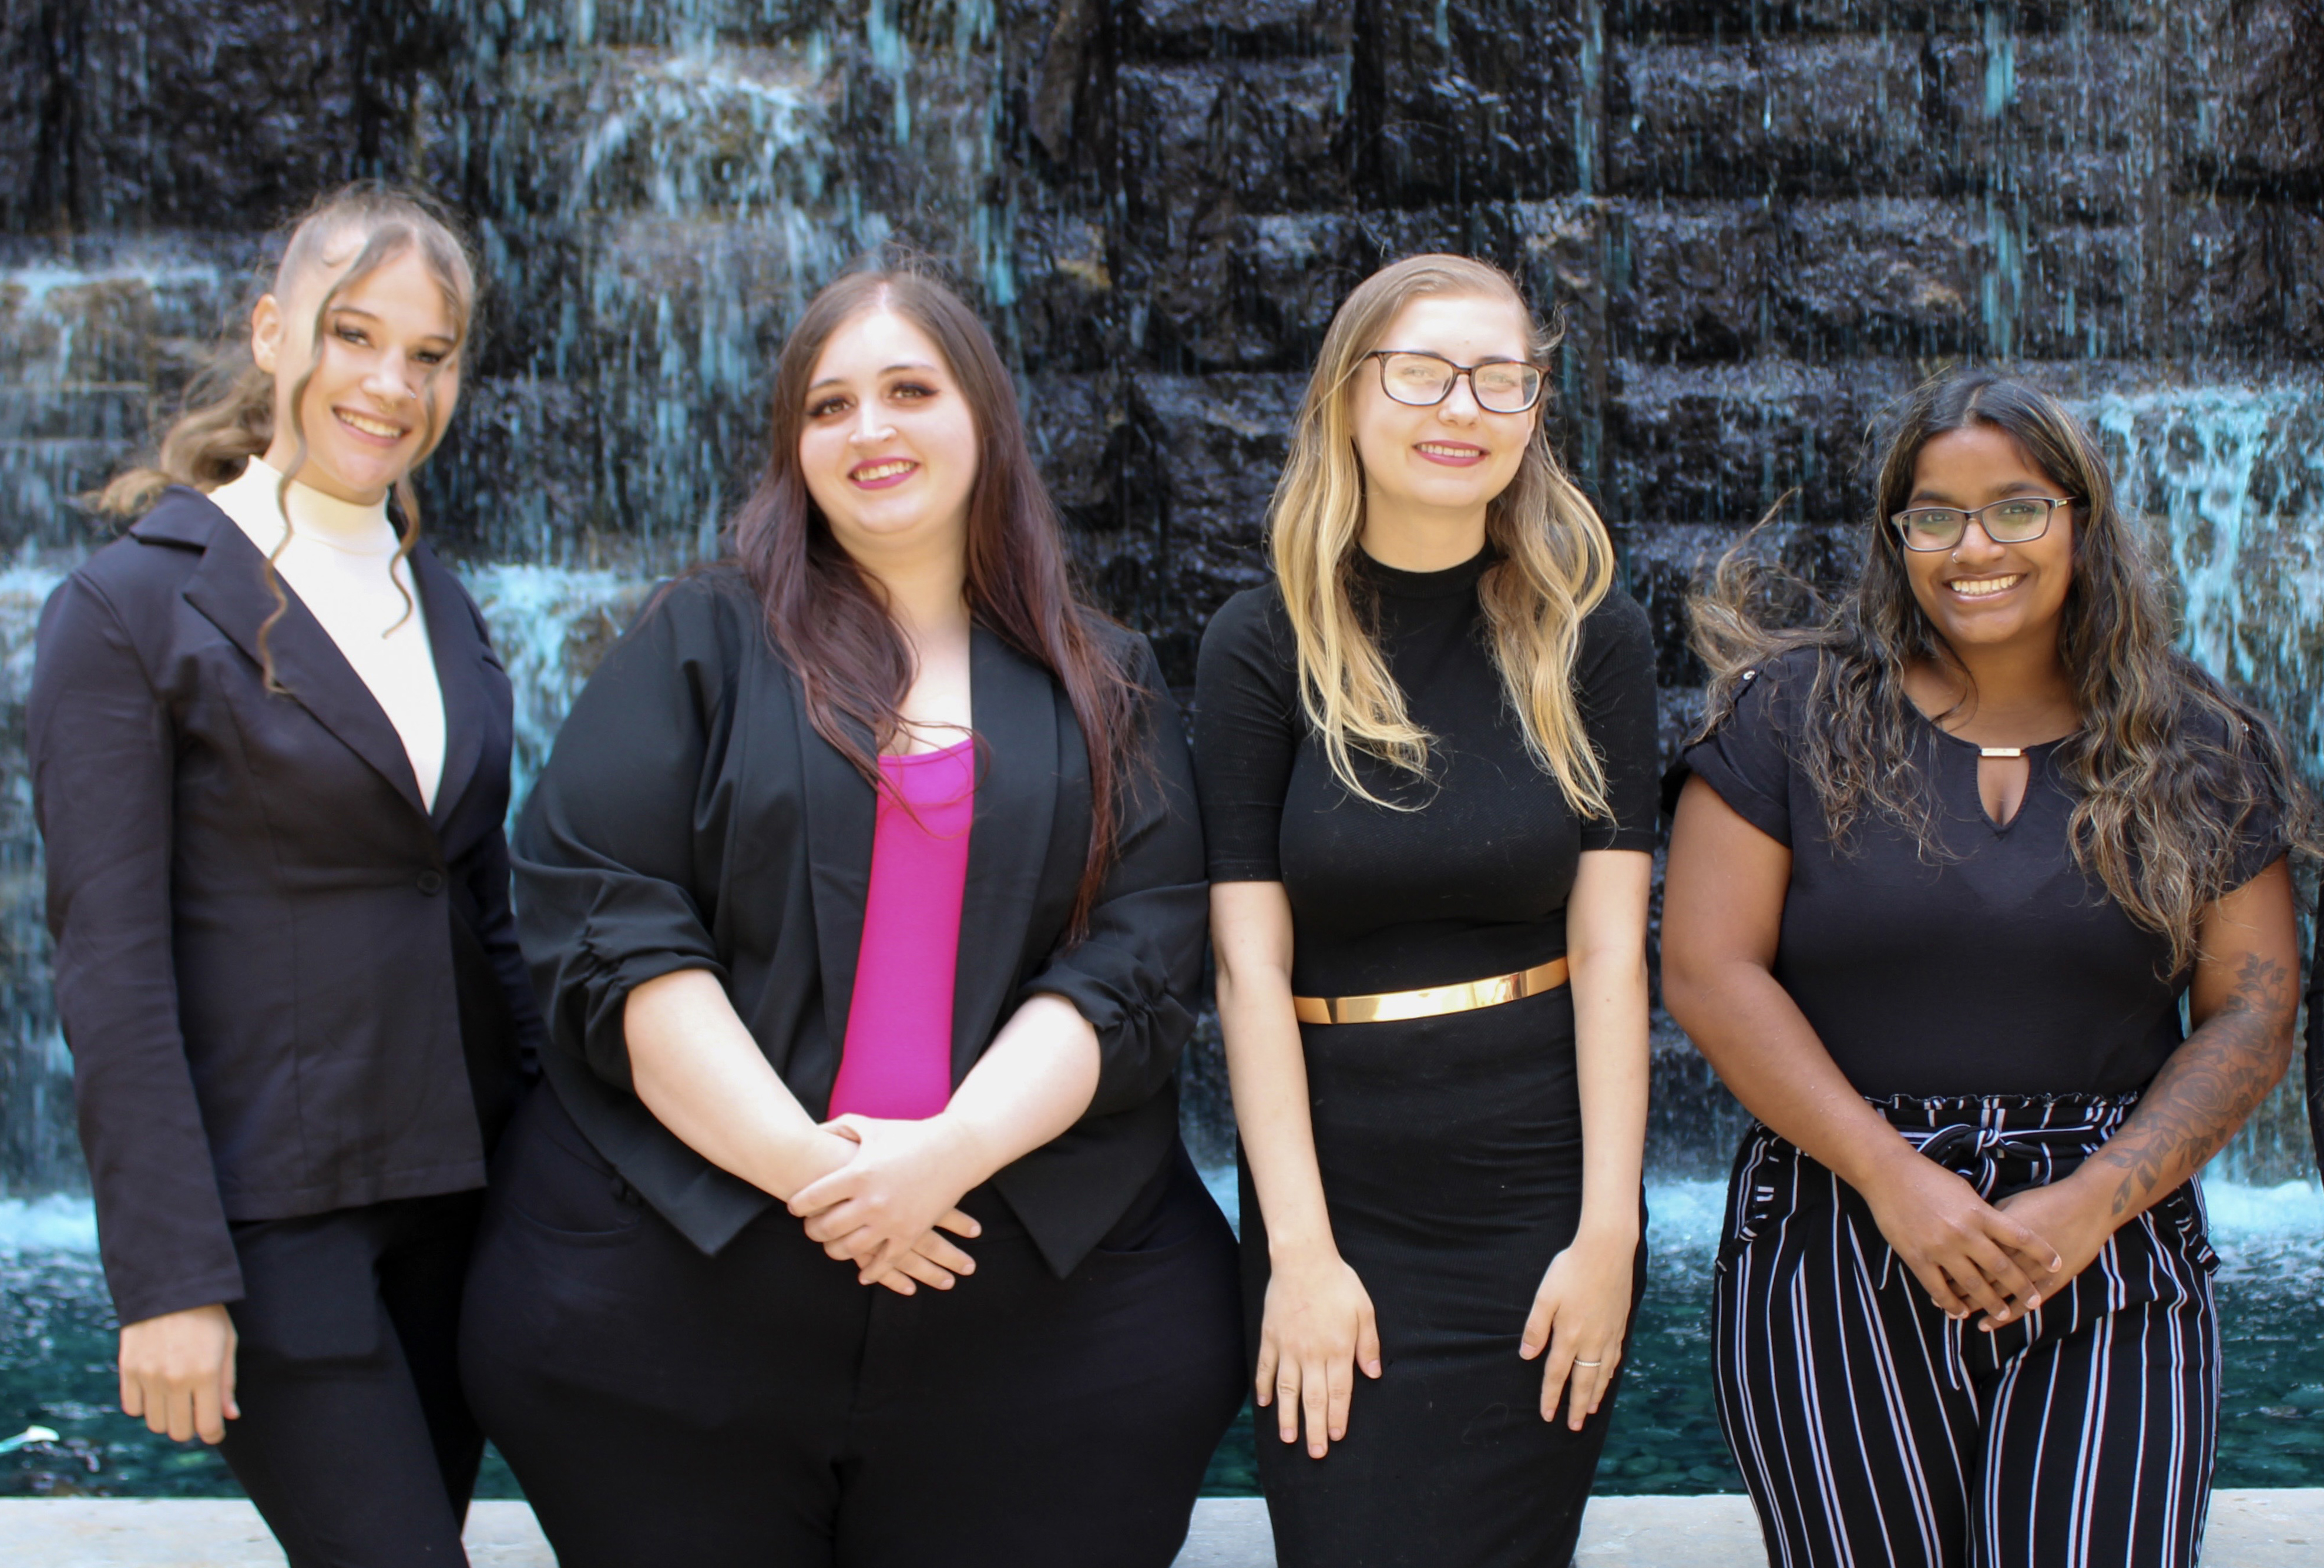 Pictured from left to right are students Cerissa Page, Alyssa Thomas, Alexis Benhart and Emily Dhanvada.